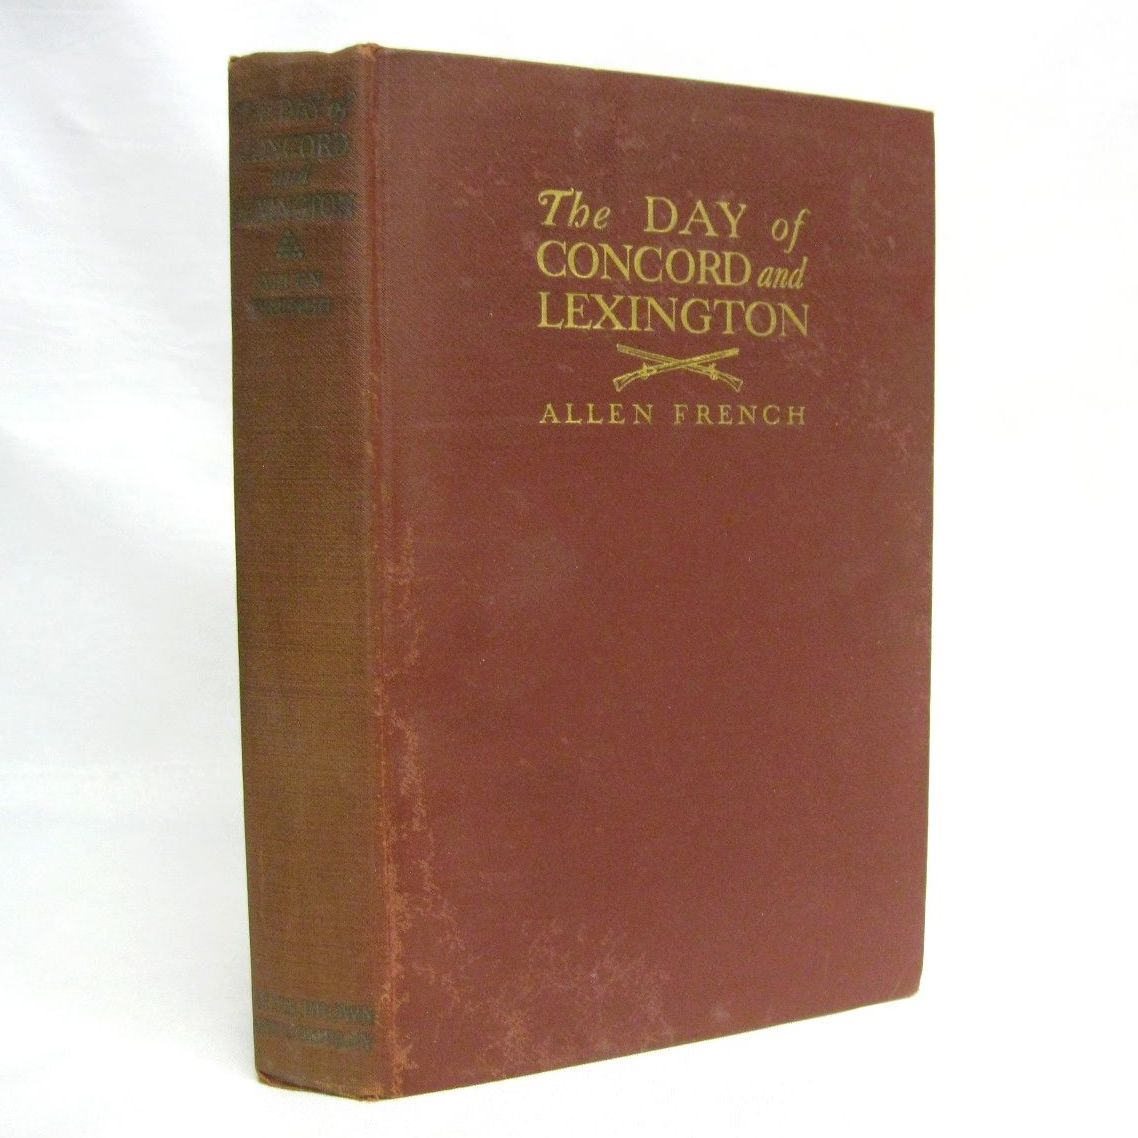 The Day of Concord and Lexington by Allen French